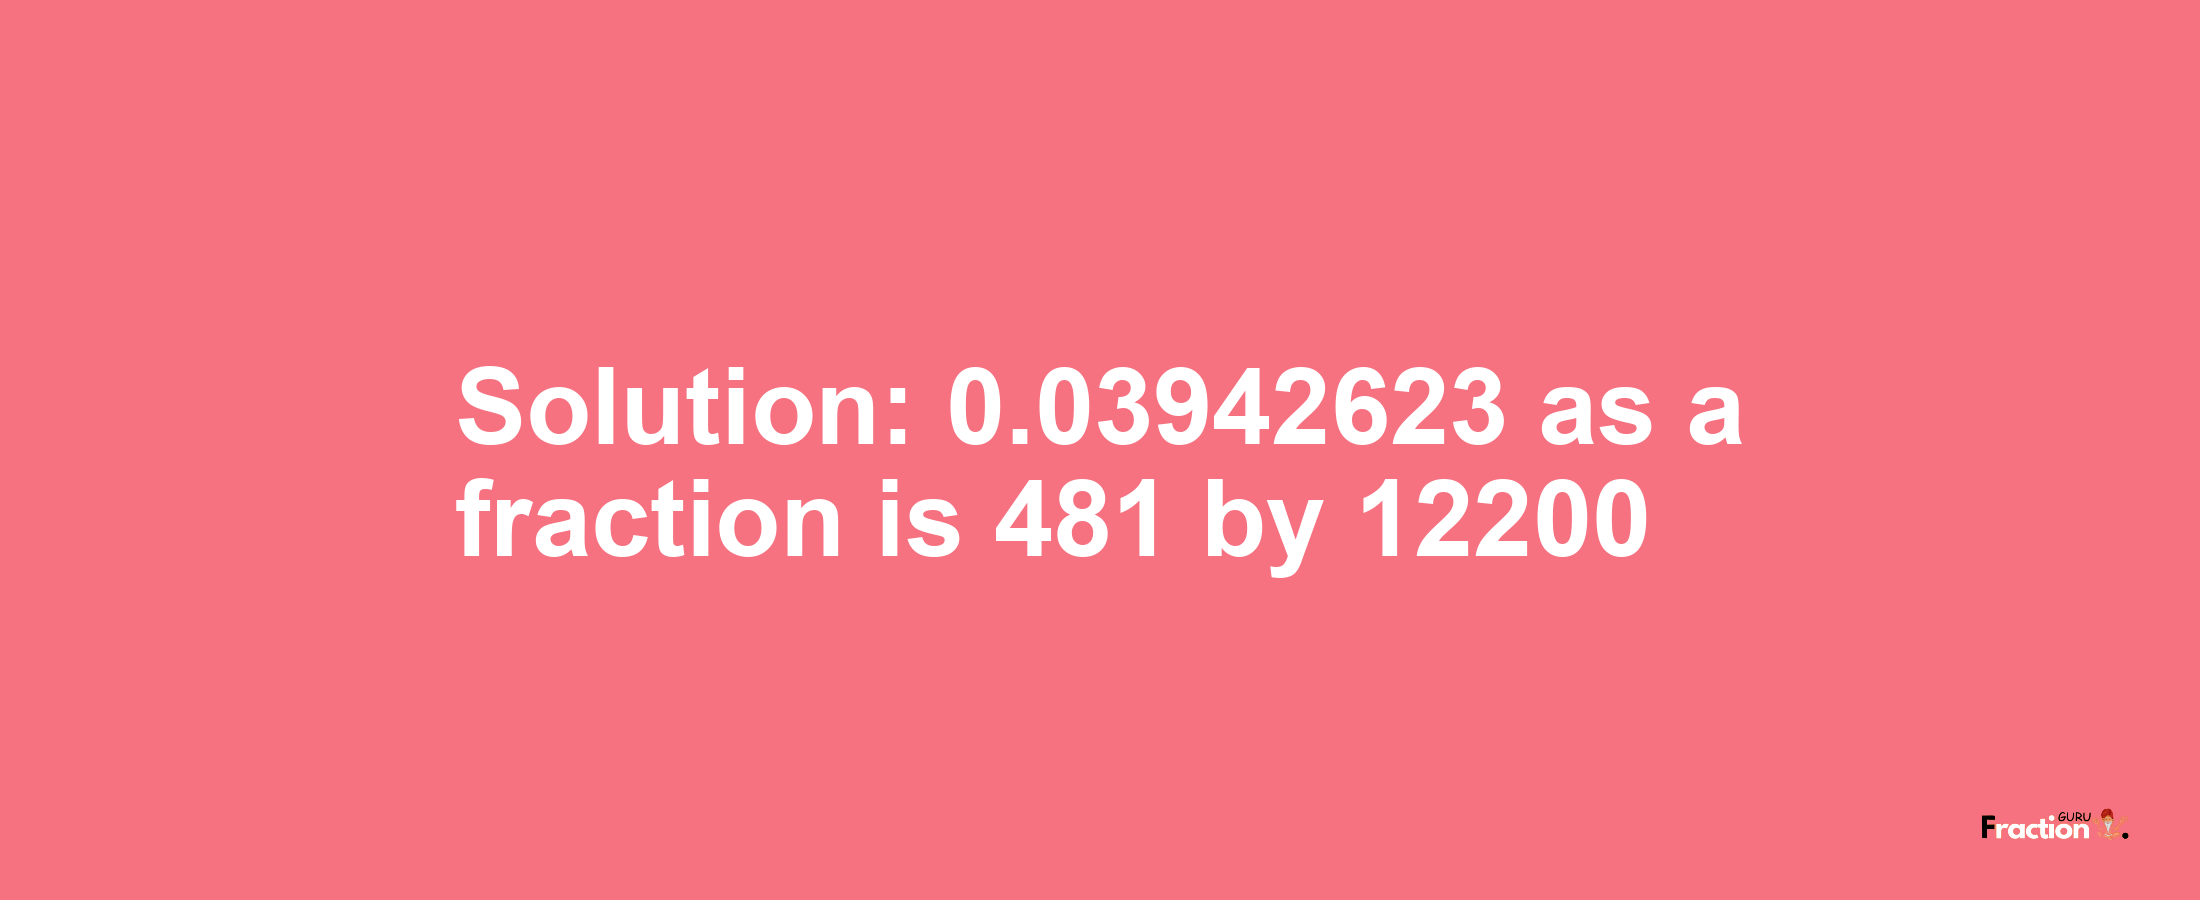 Solution:0.03942623 as a fraction is 481/12200